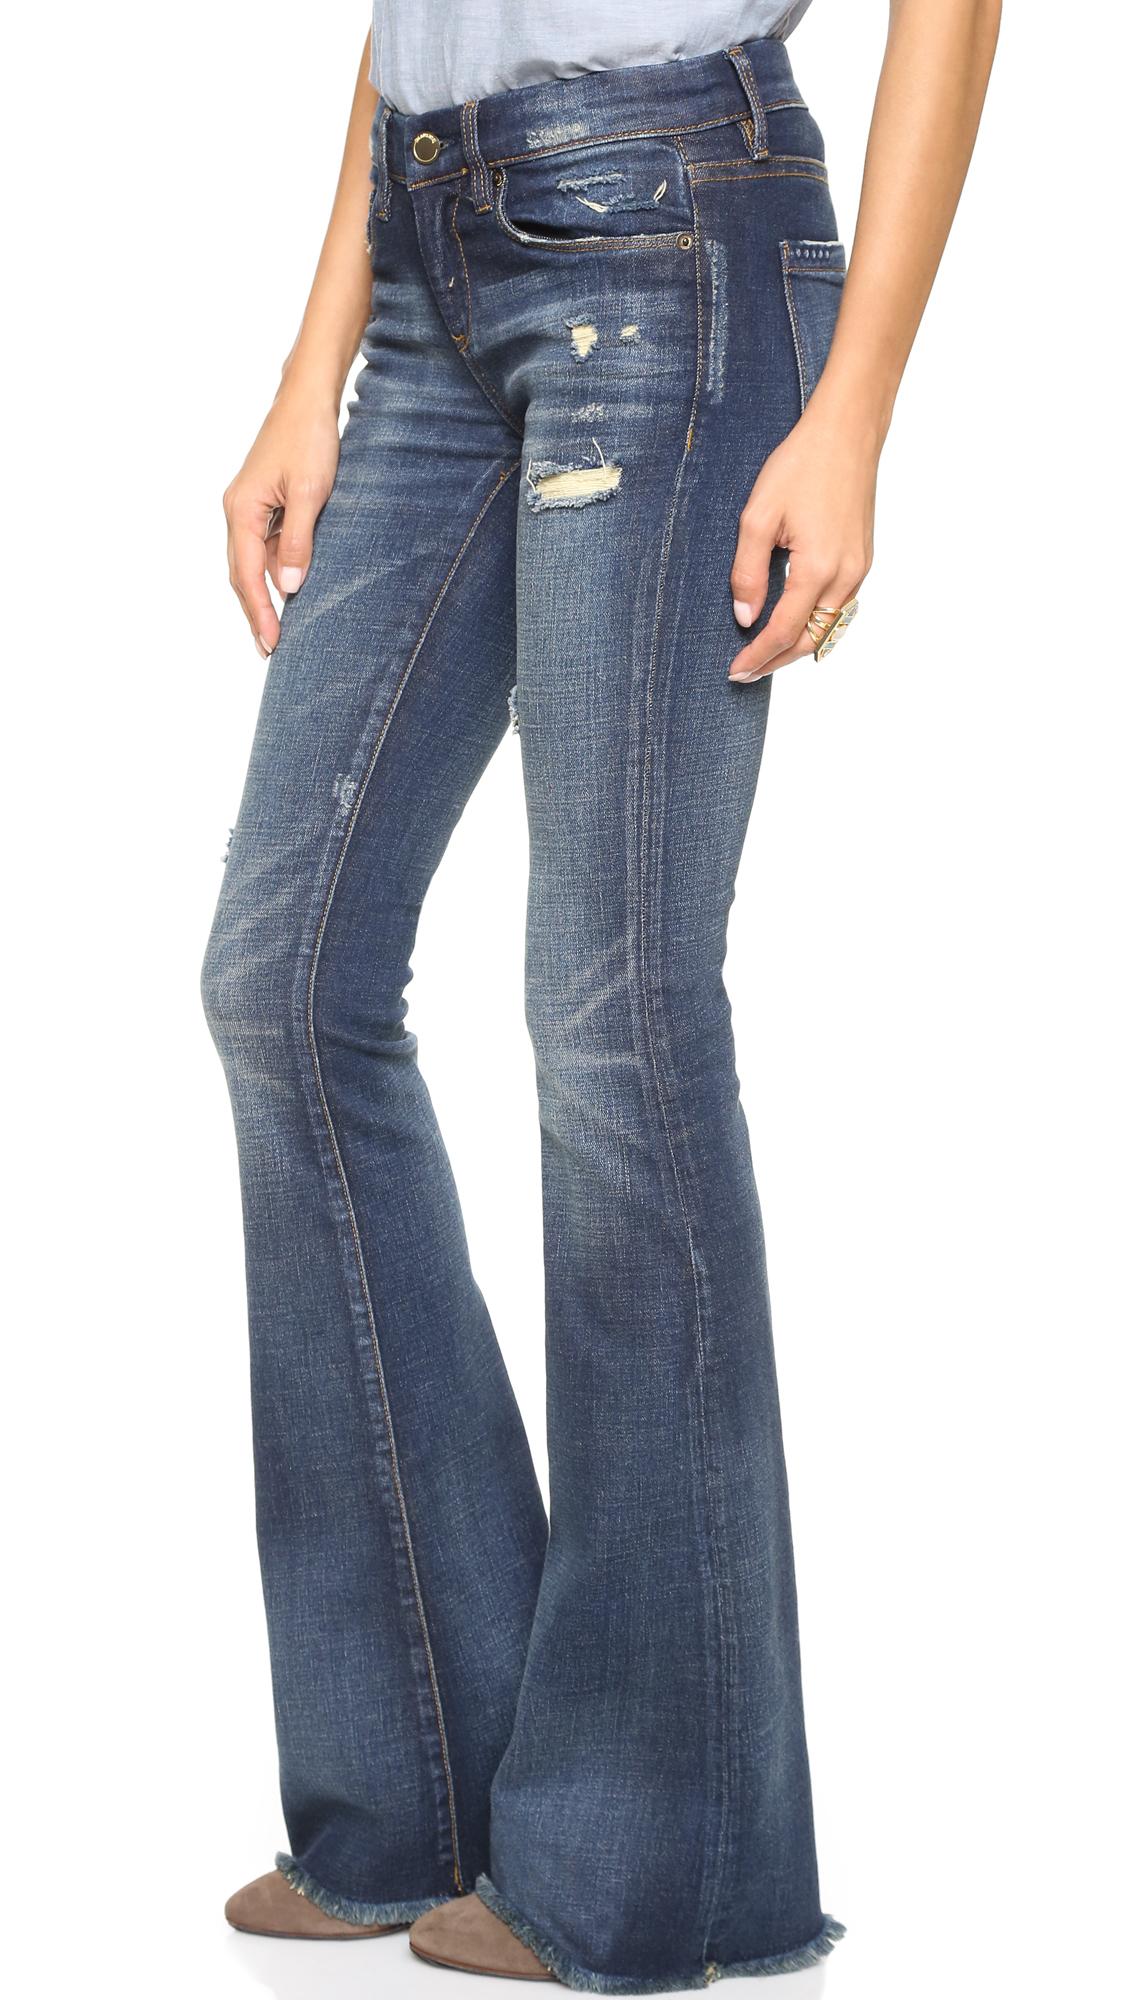 Lyst - Blank Nyc Distressed Flare Jeans in Blue